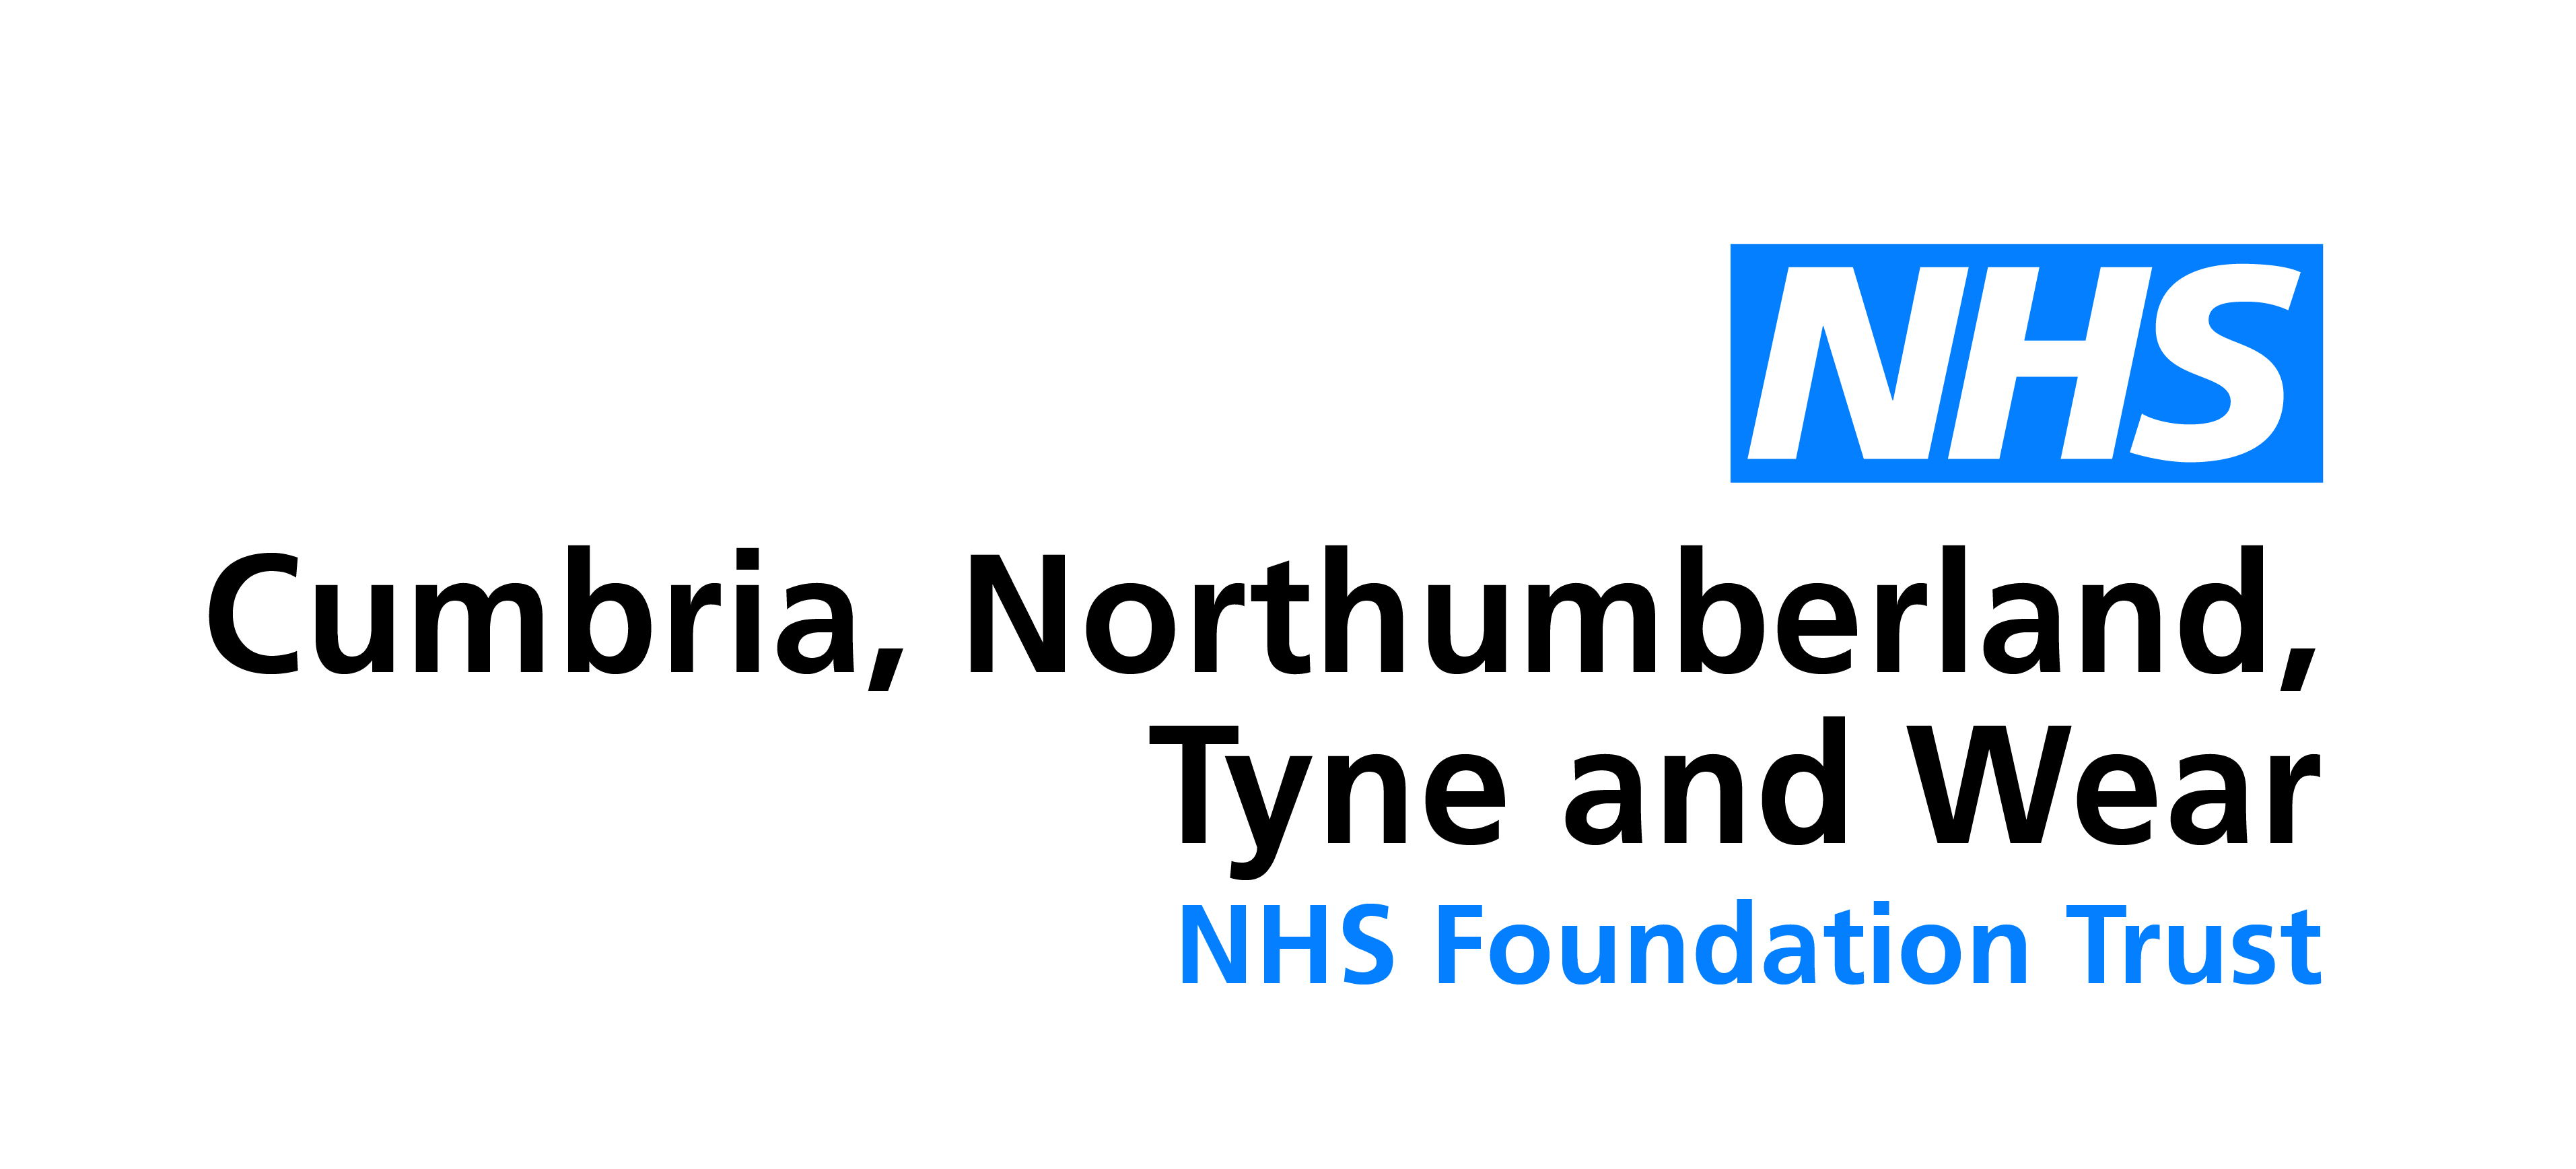 Northumberland, Tyne and Wear NHS Foundation Trust are exhibiting at the Nursing Careers and Jobs Fair